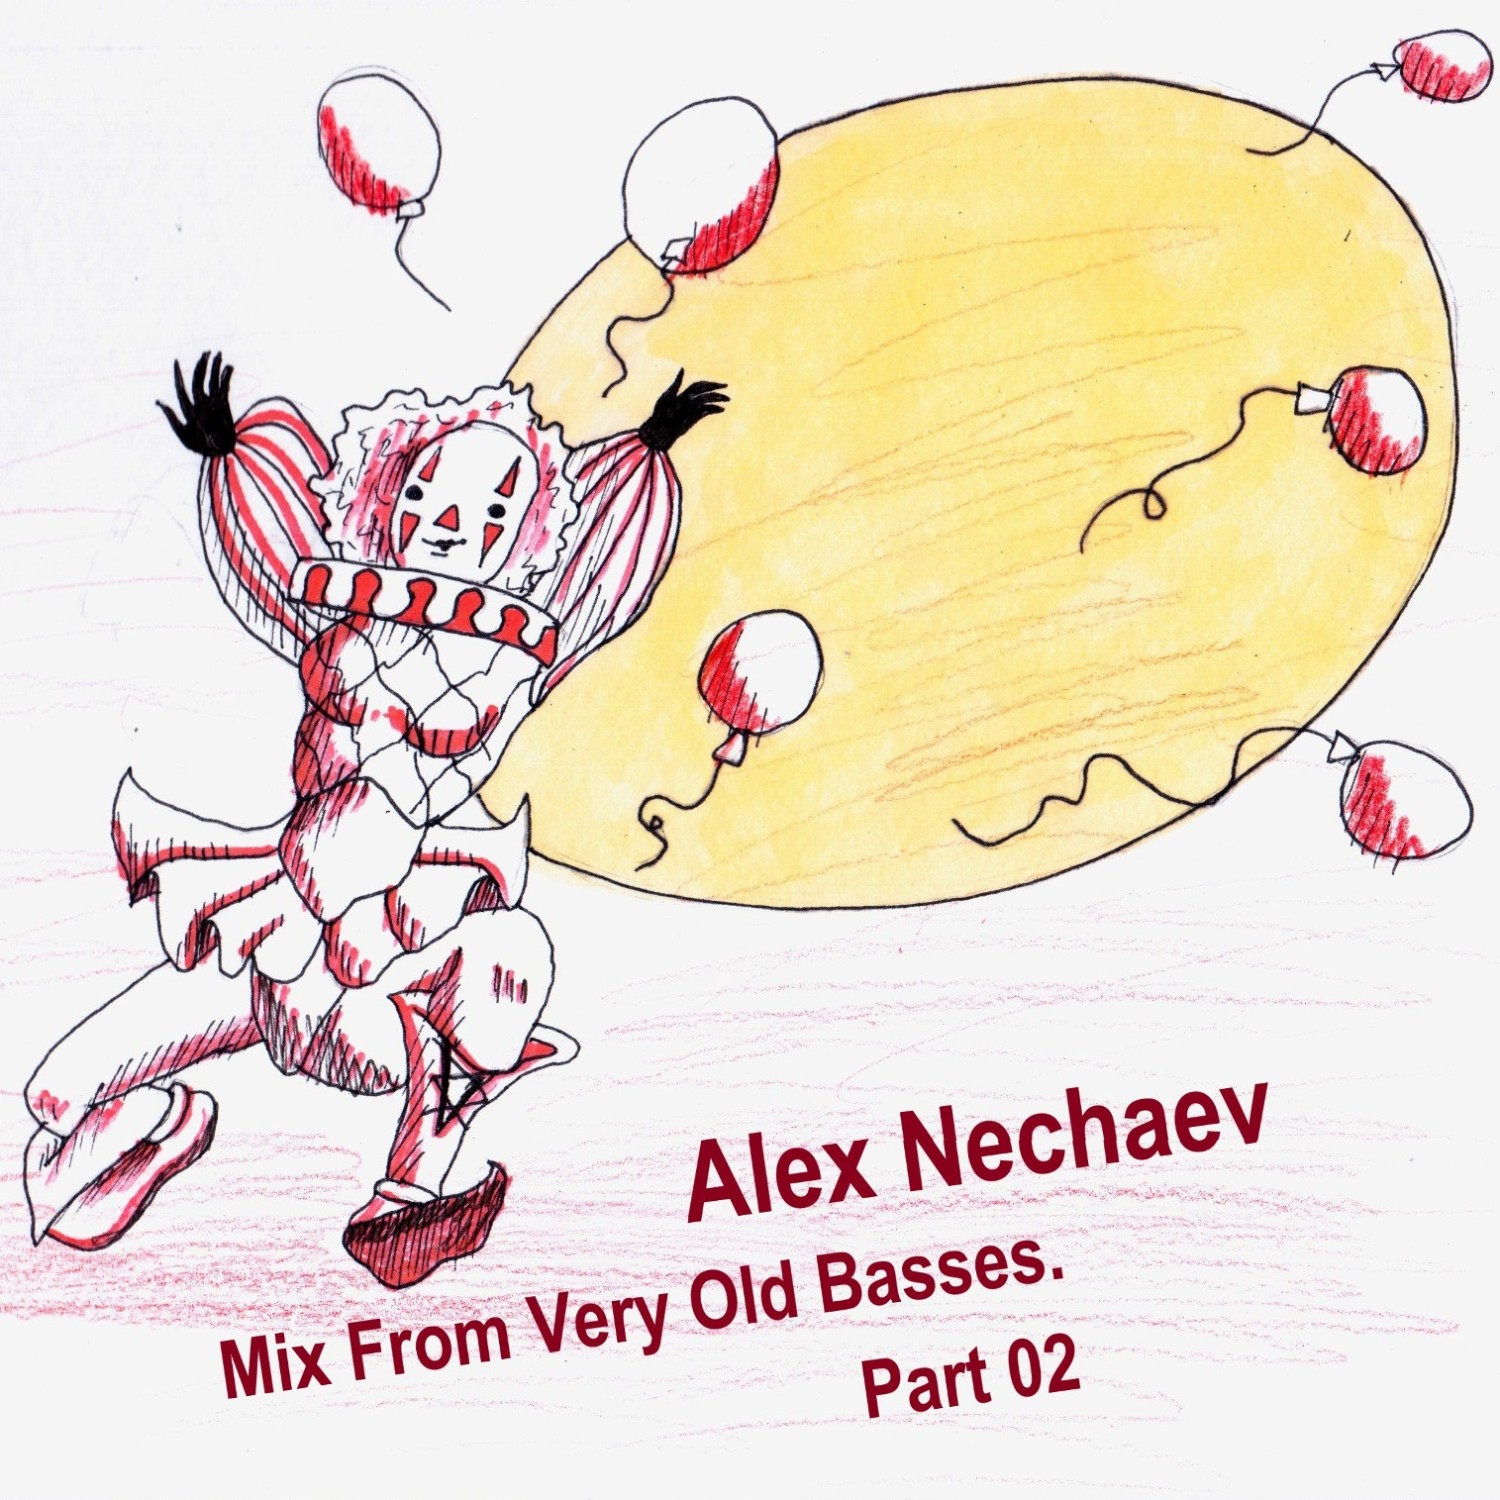 ALEX NECHAEV - MIX FROM VERY OLD BASSES. PART 02